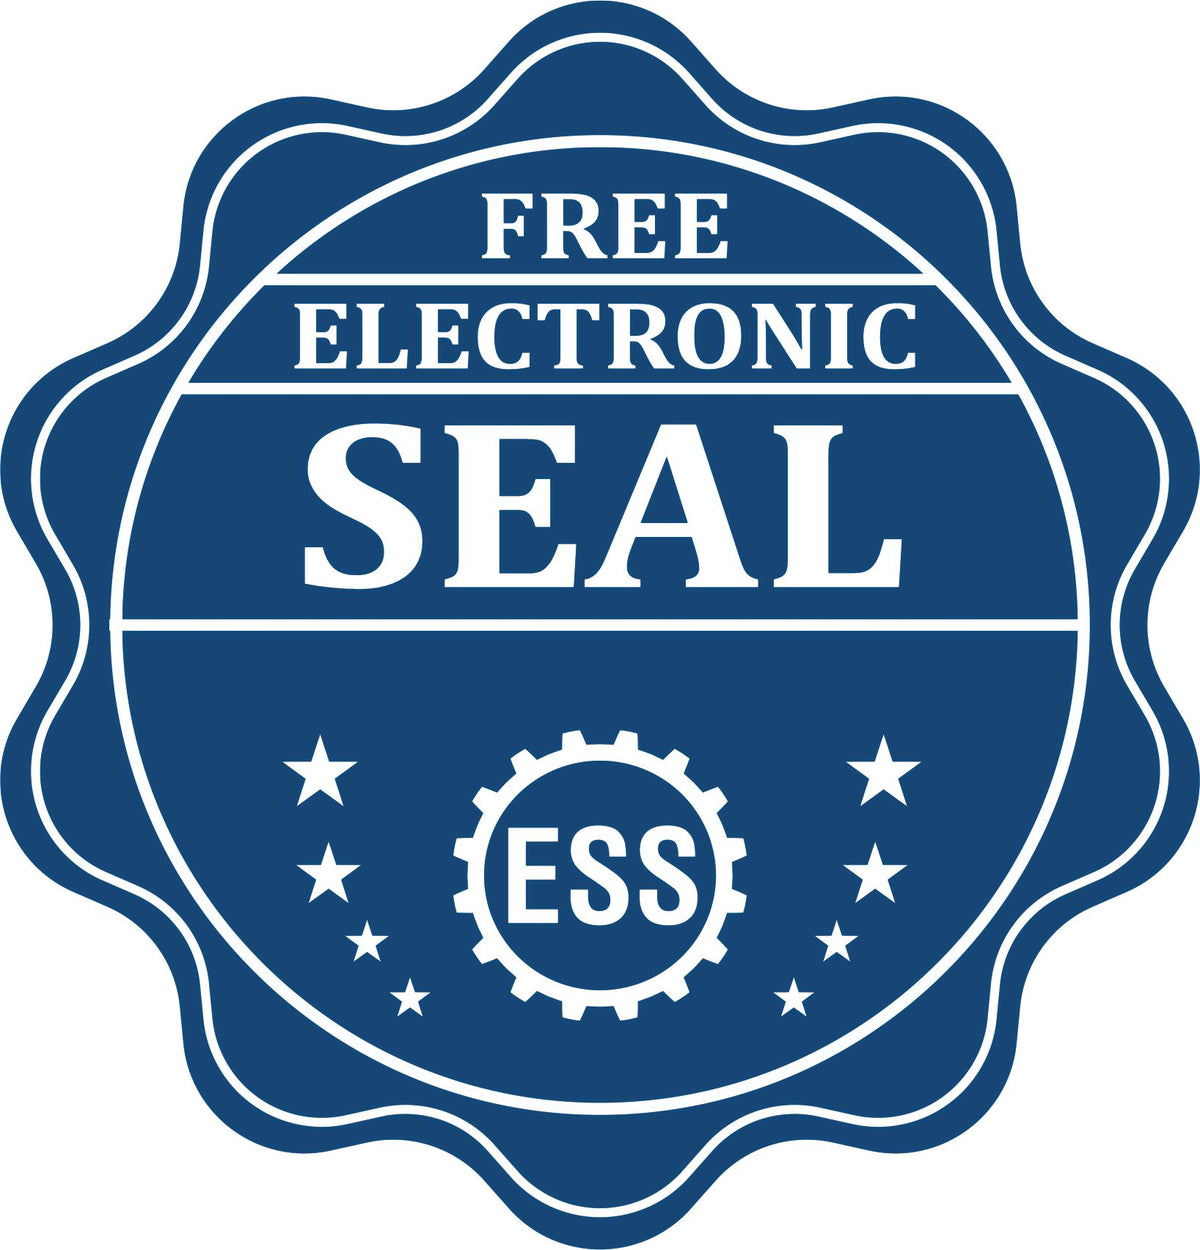 A badge showing a free electronic seal for the State of Florida Extended Long Reach Engineer Seal with stars and the ESS gear on the emblem.